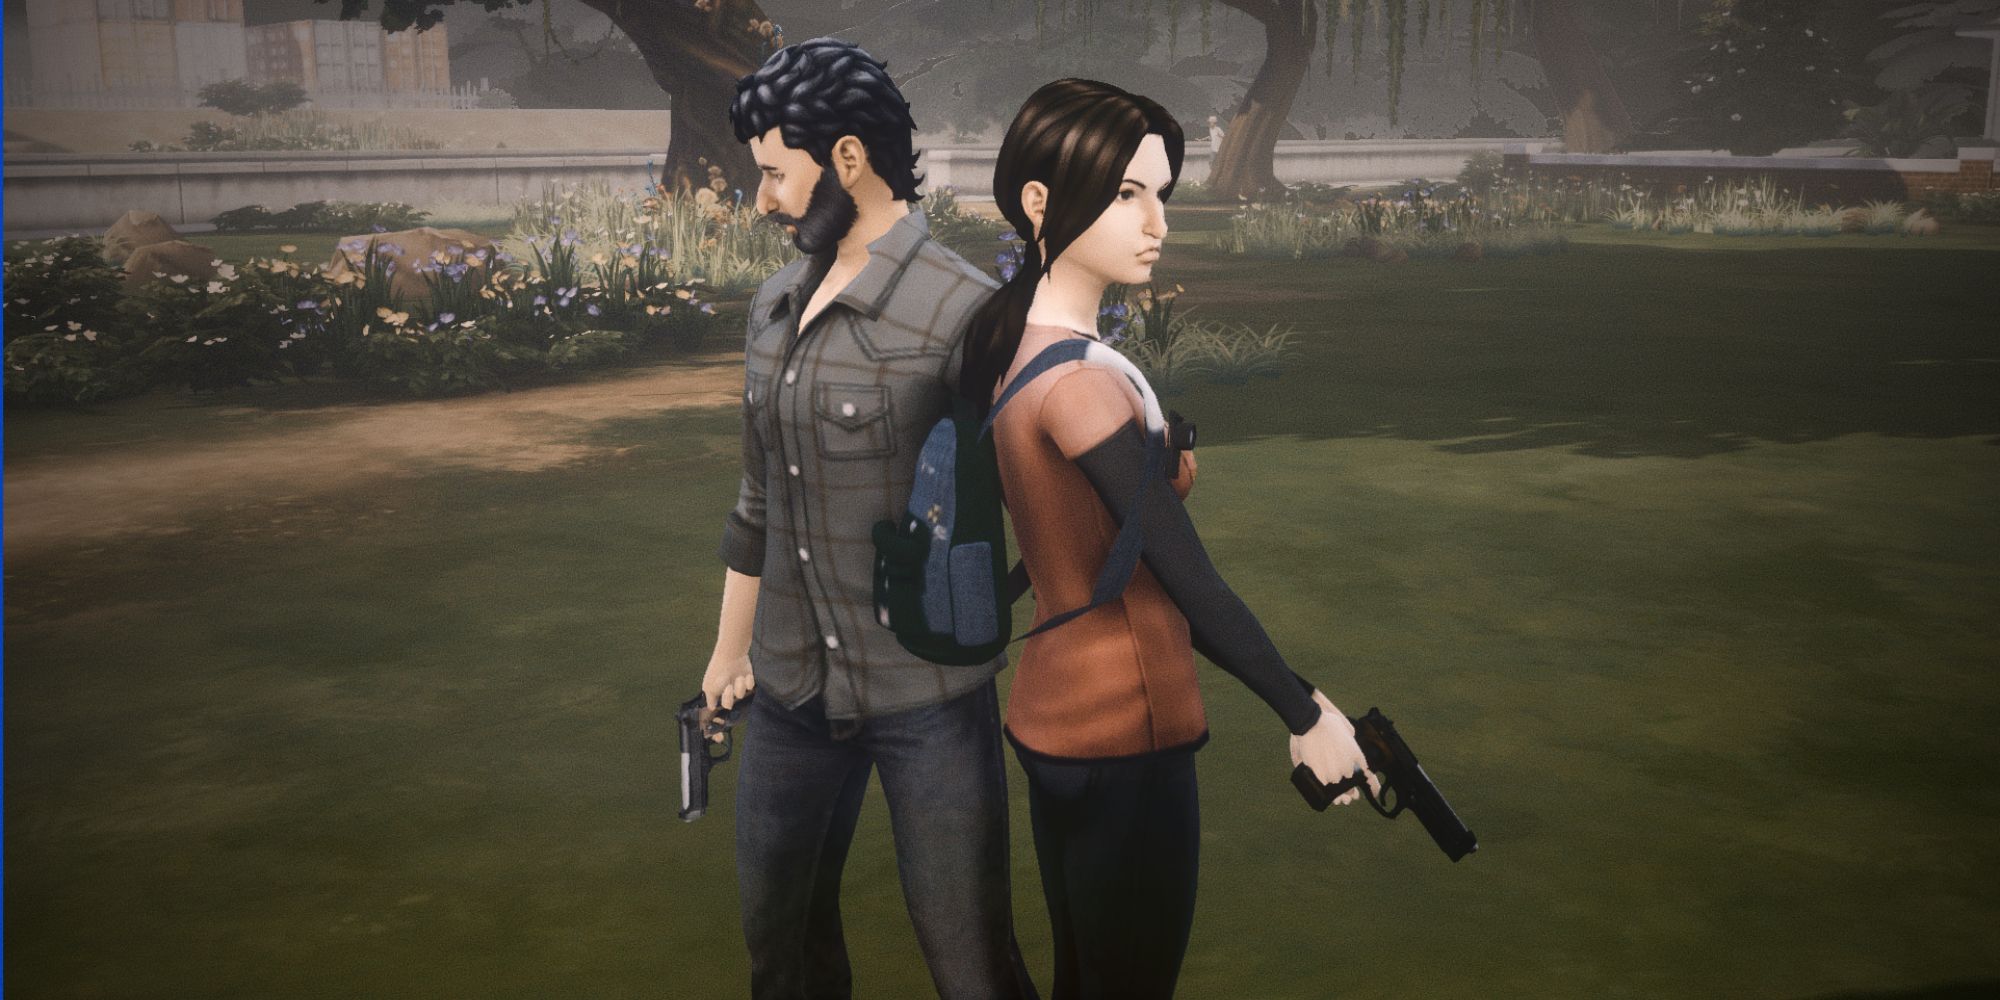 Sims of Joel and Ellie wearing the CC by Cantransimmer holding handguns